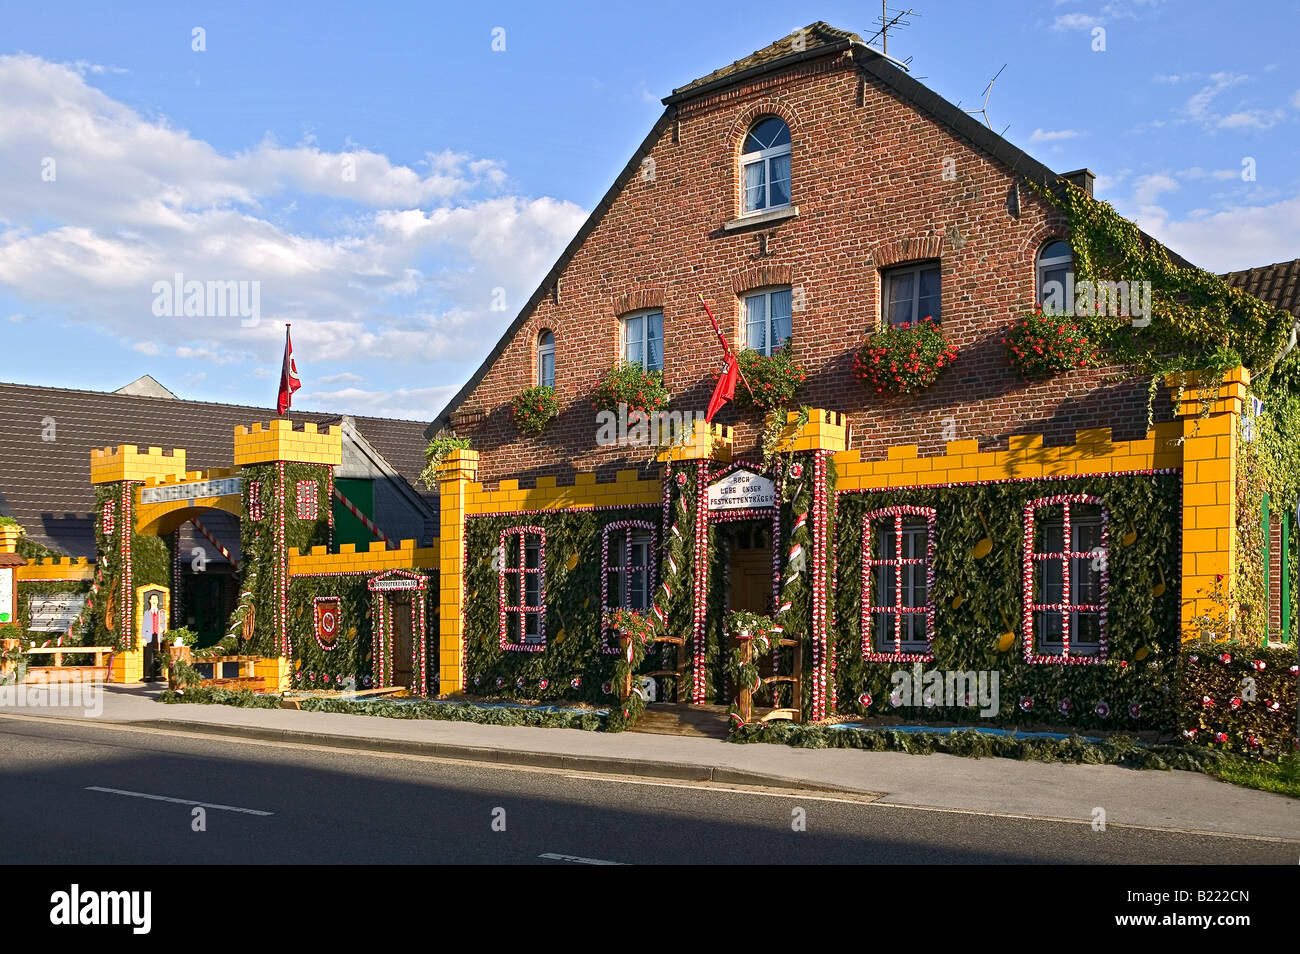 decorated house for traditional festival Schützenfest Germany Europe Stock Photo